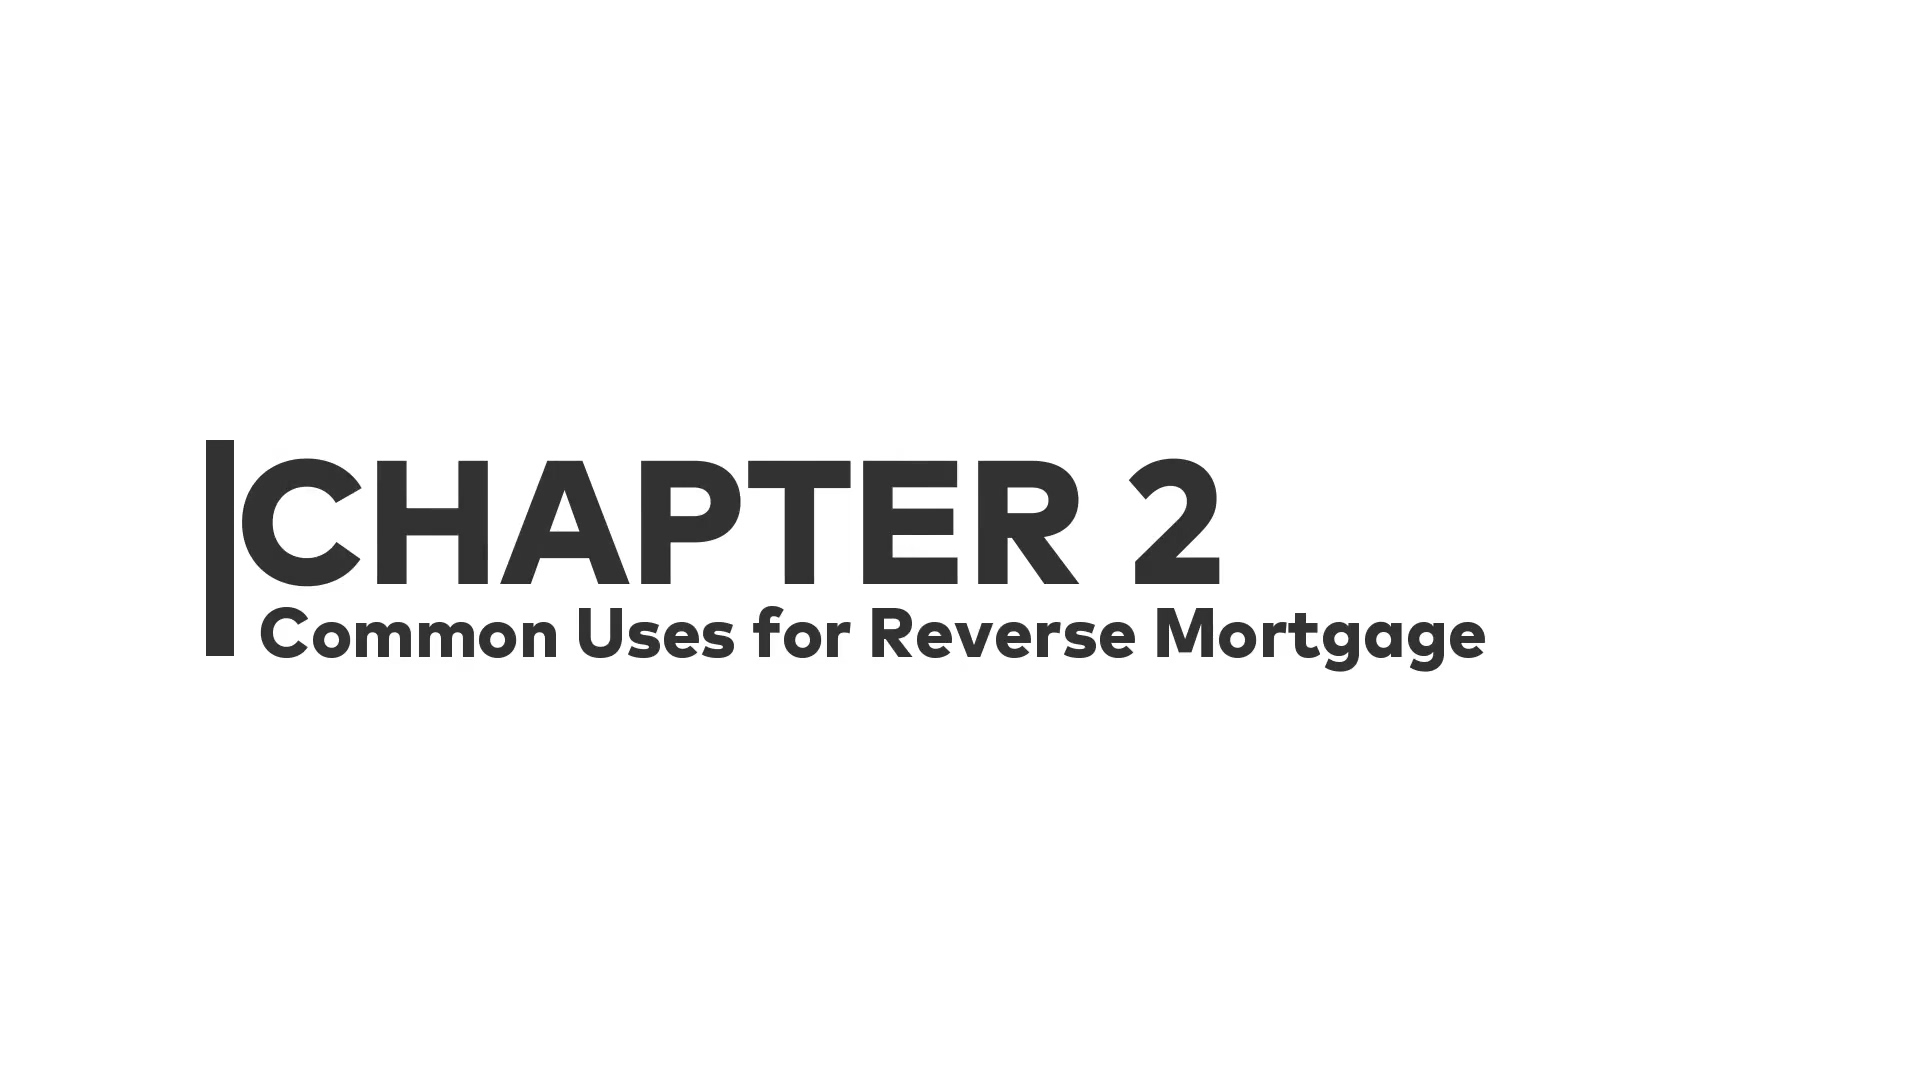 Common Uses for Reverse Mortgage